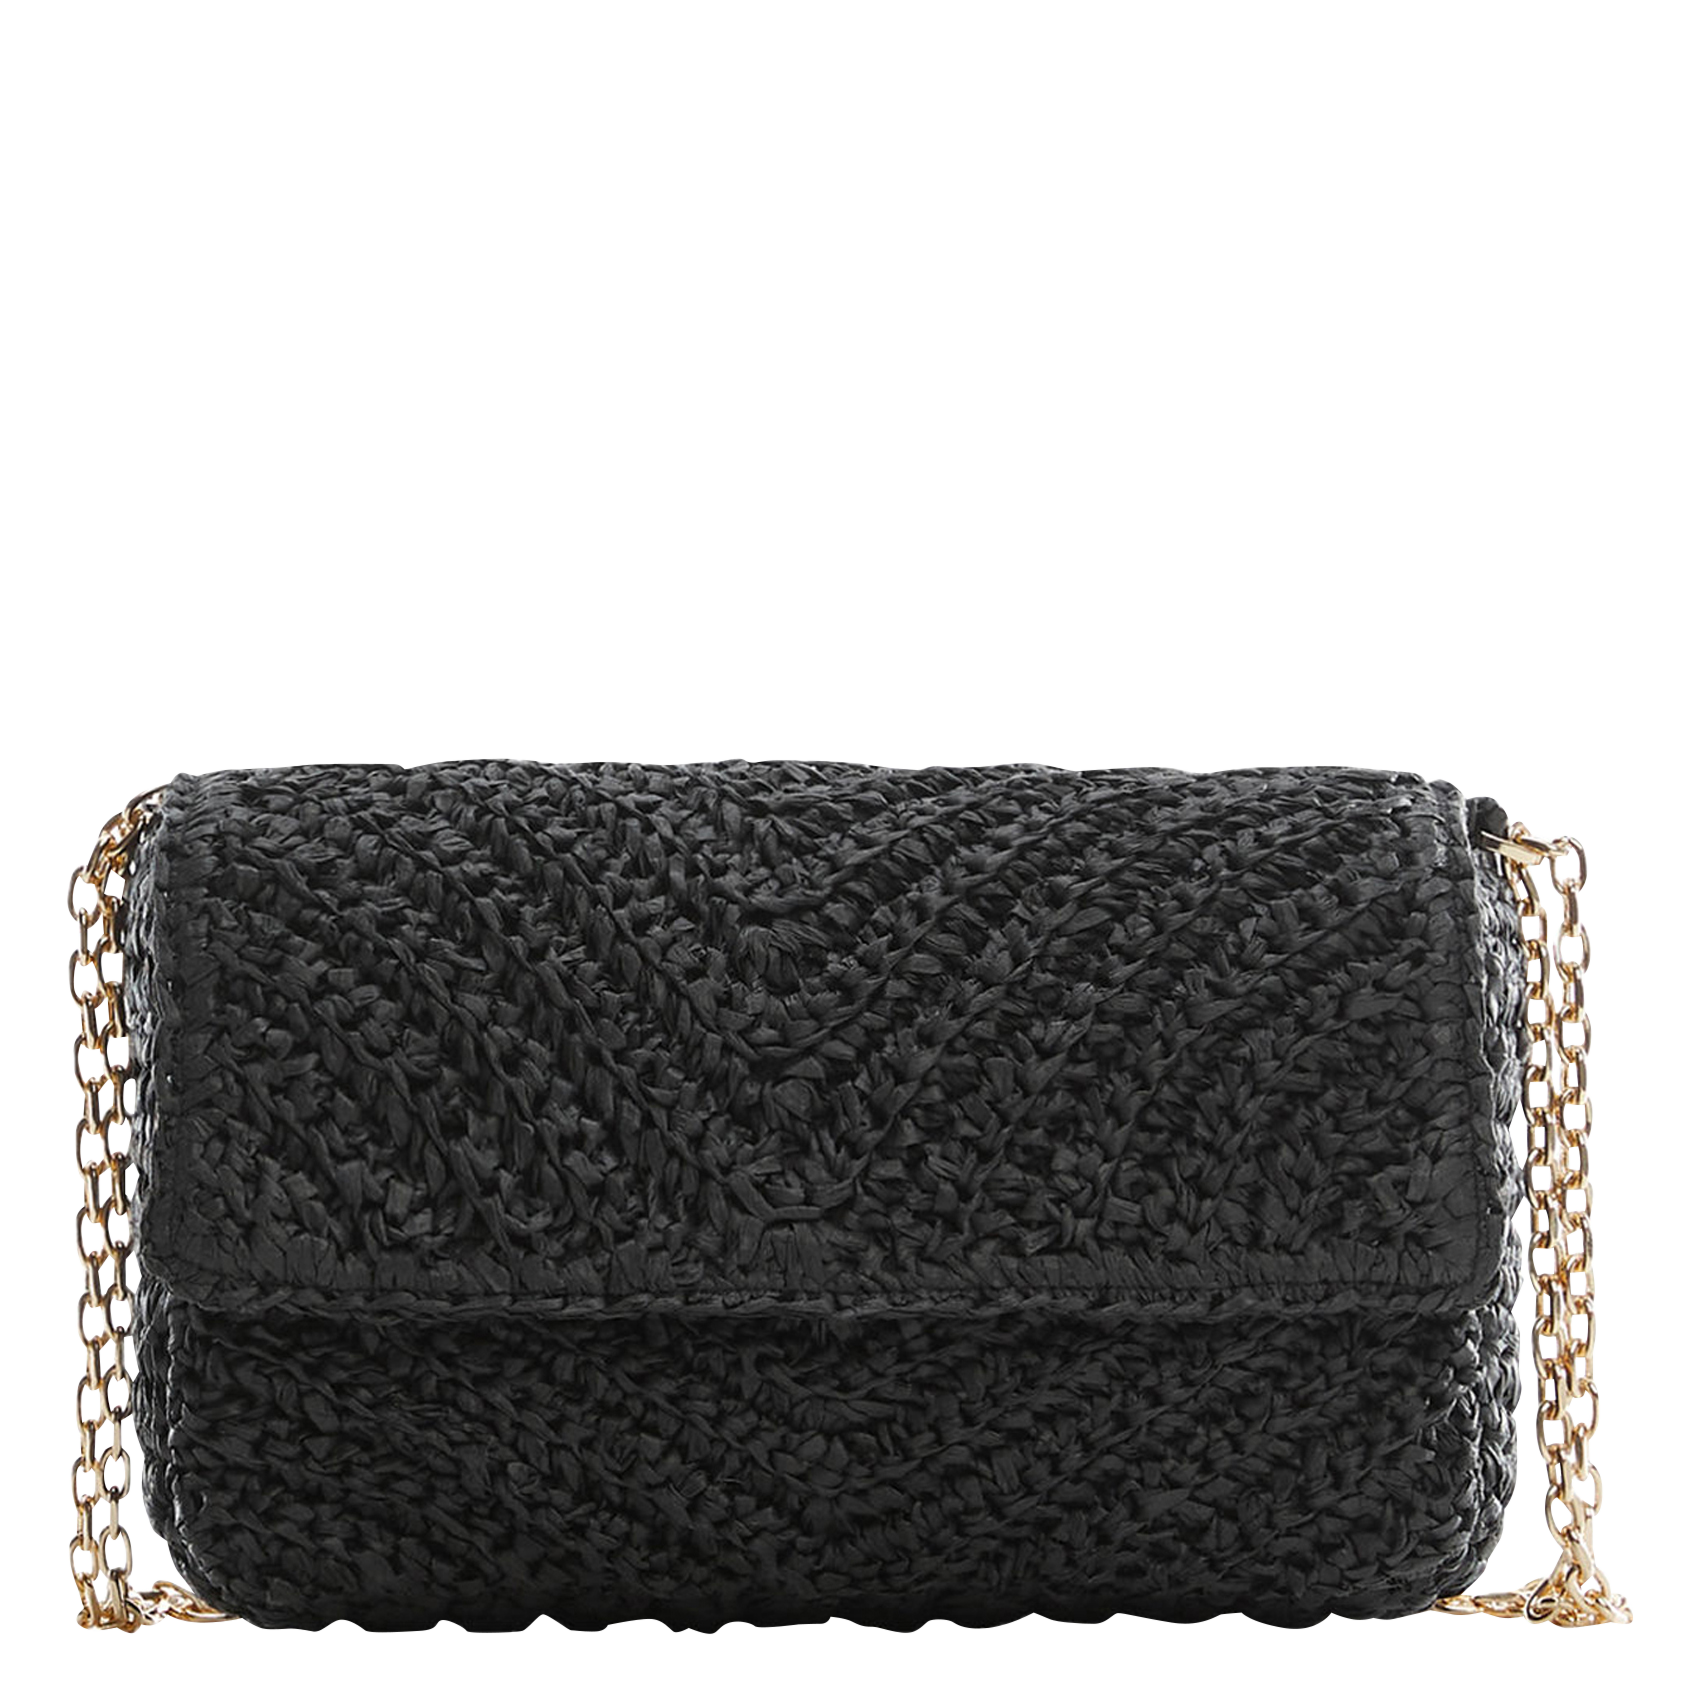 Mango Rain Quilted Purse, Black, One Size